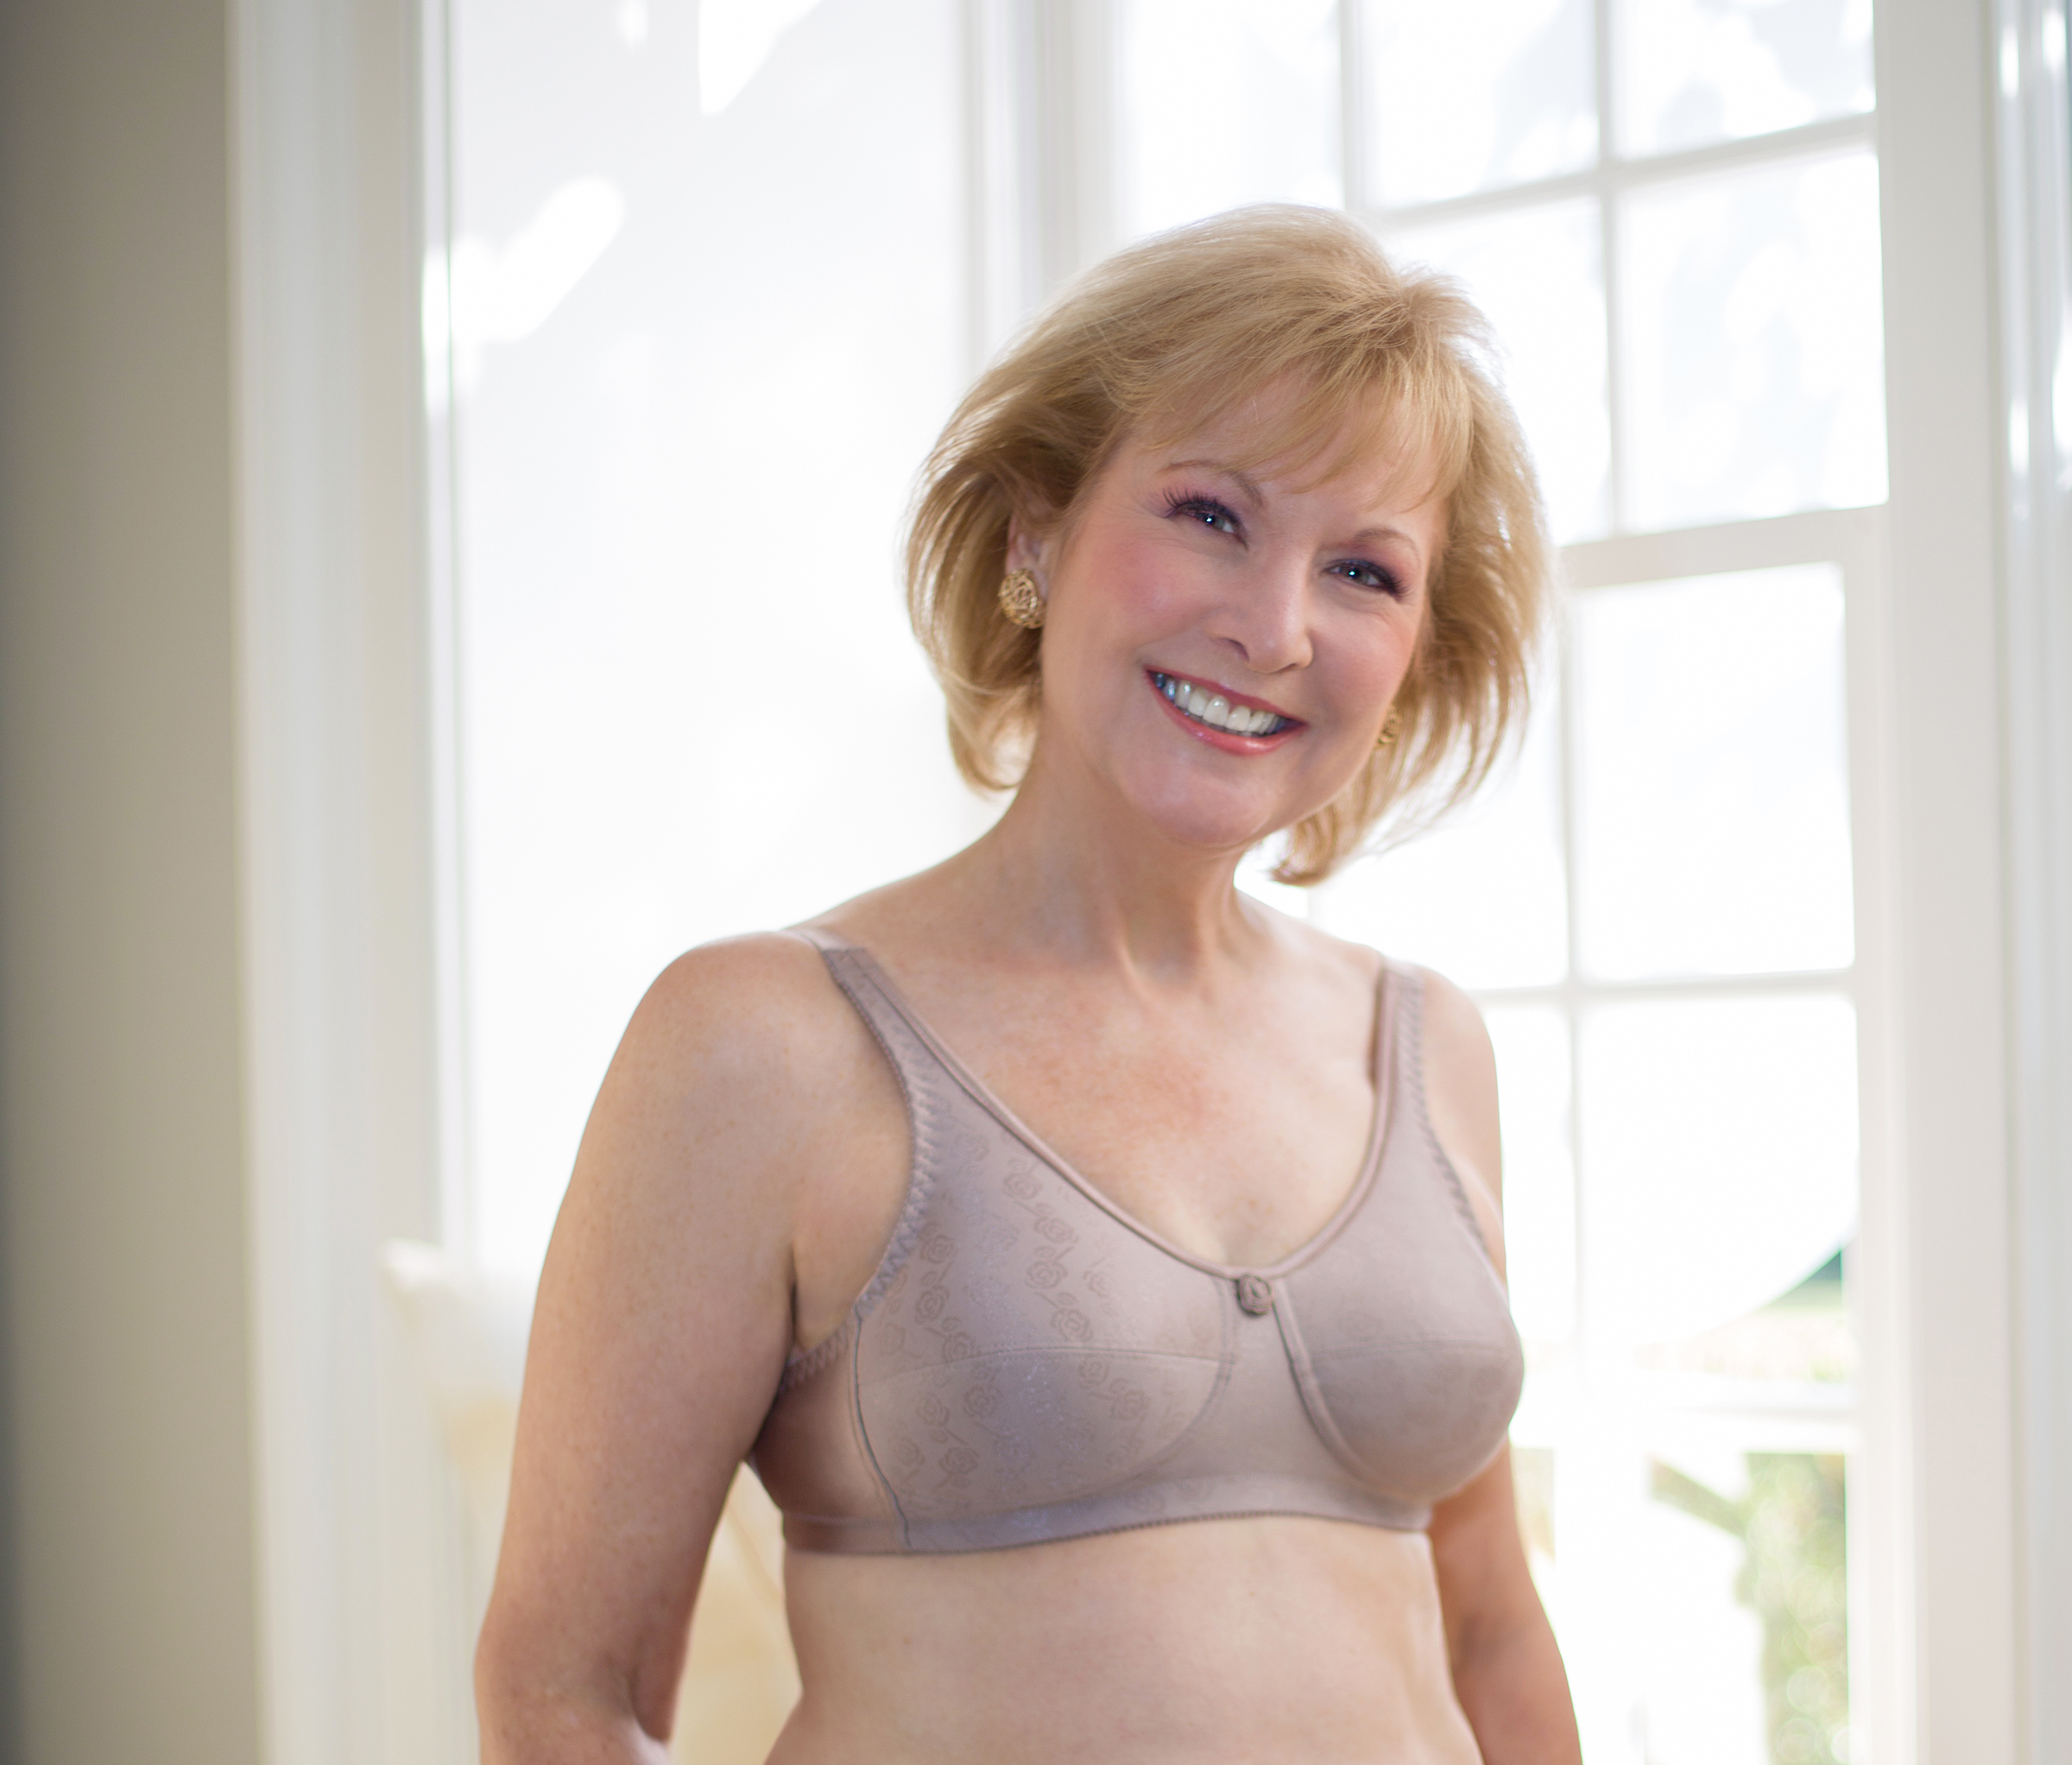 Mastectomy Bra The Rose Contour Size 40A Lilac